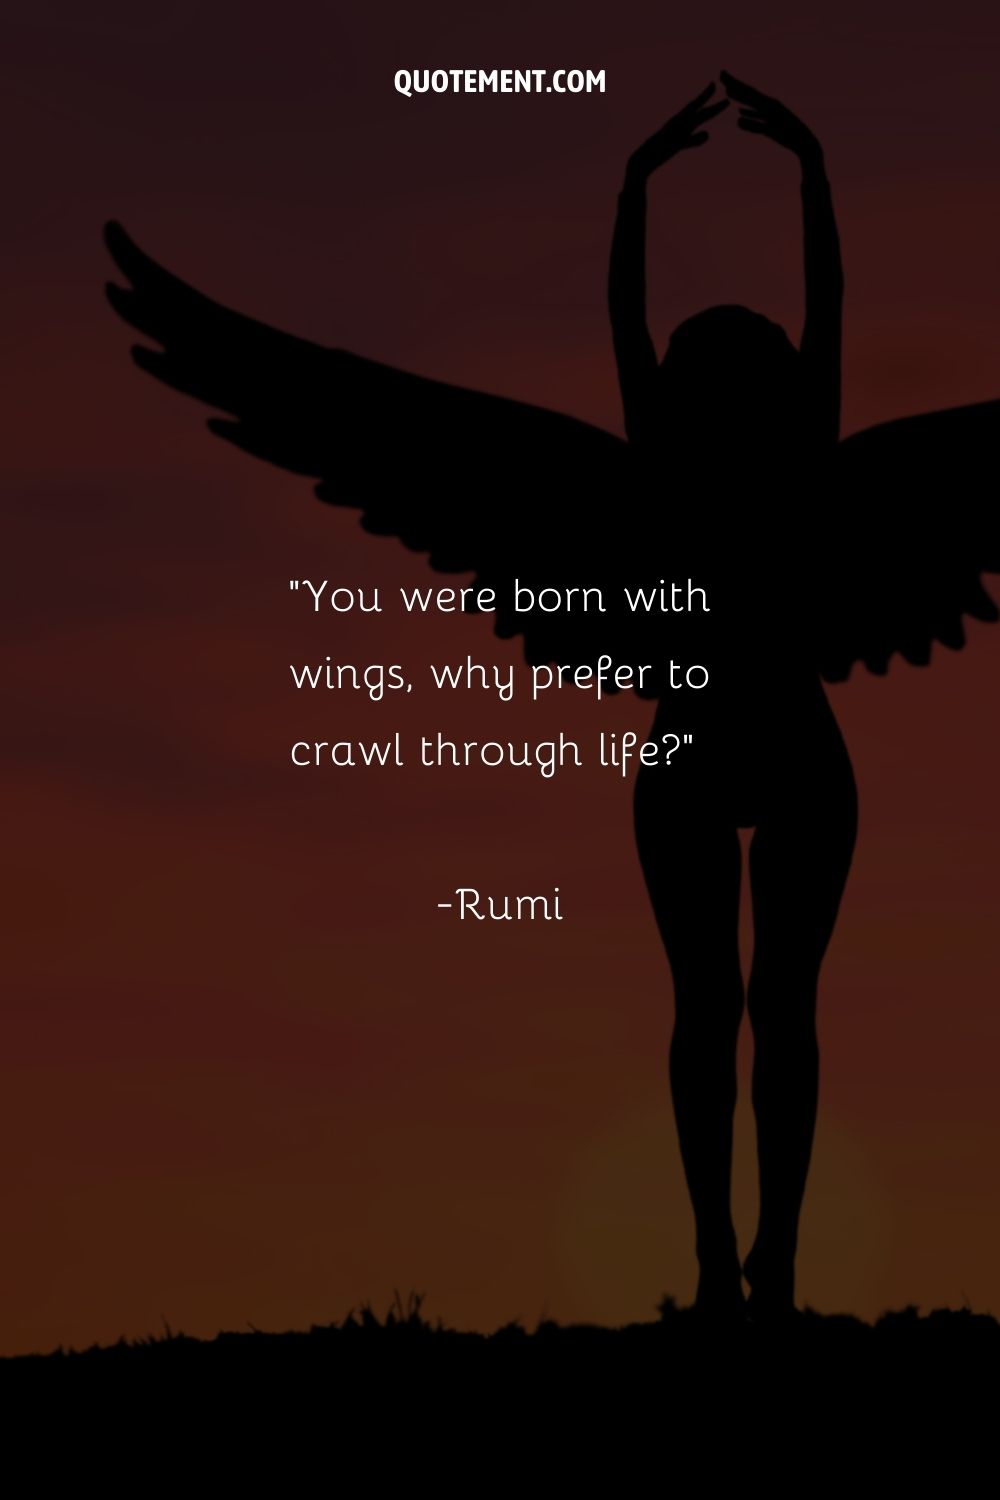 You were born with wings, why prefer to crawl through life